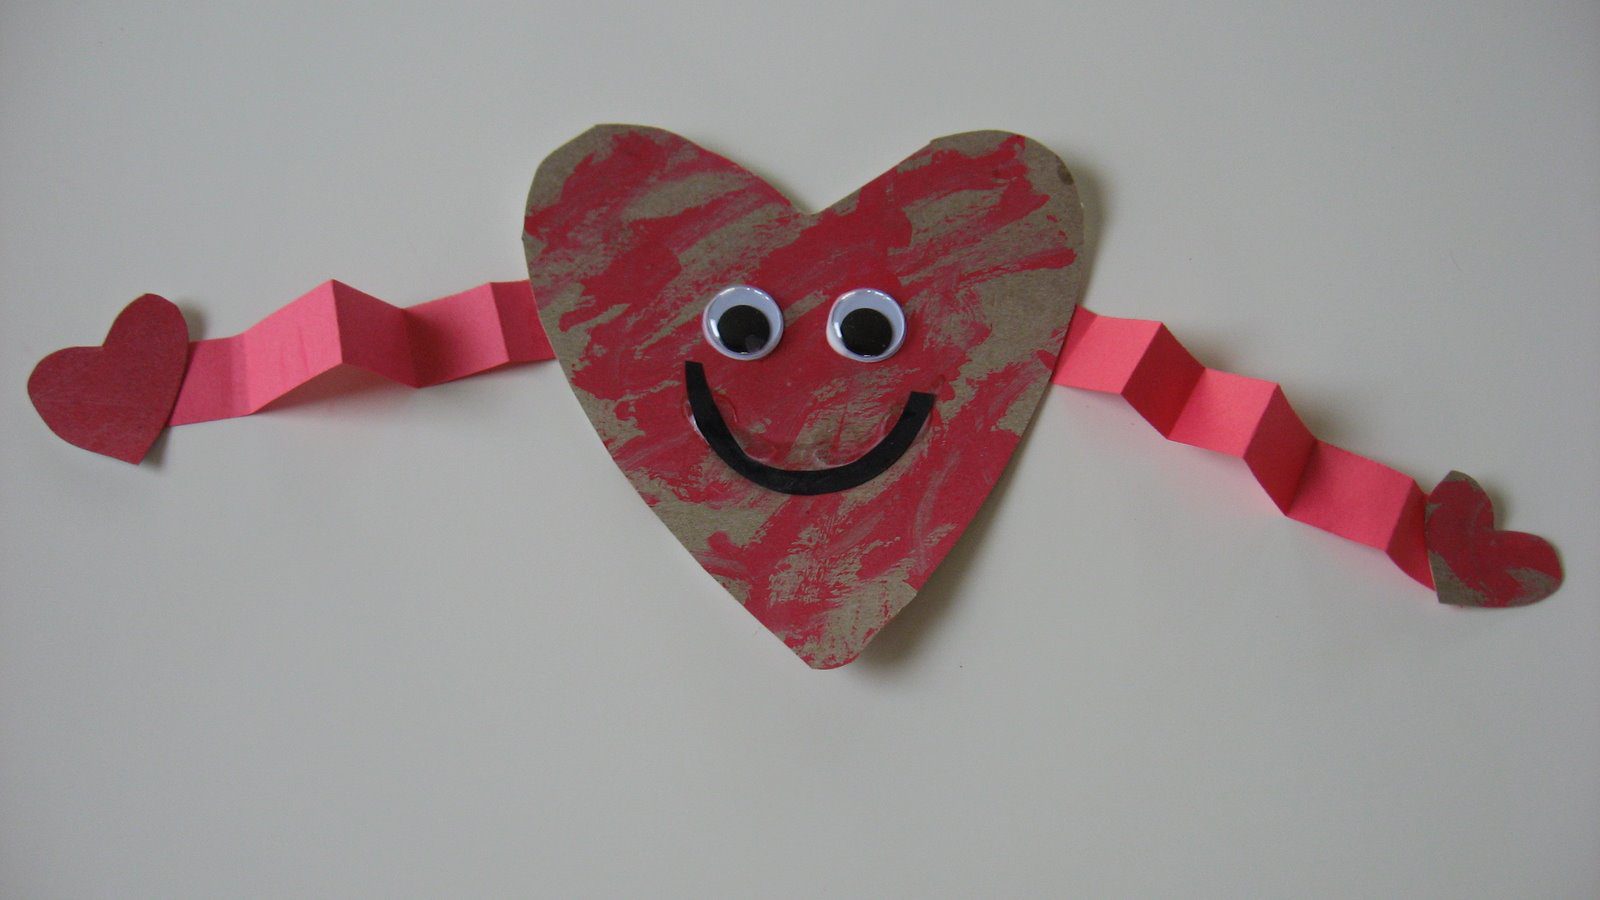 A cardboard heart has a smiley face and googly eyes on it. The arms are made from folded construction paper. 